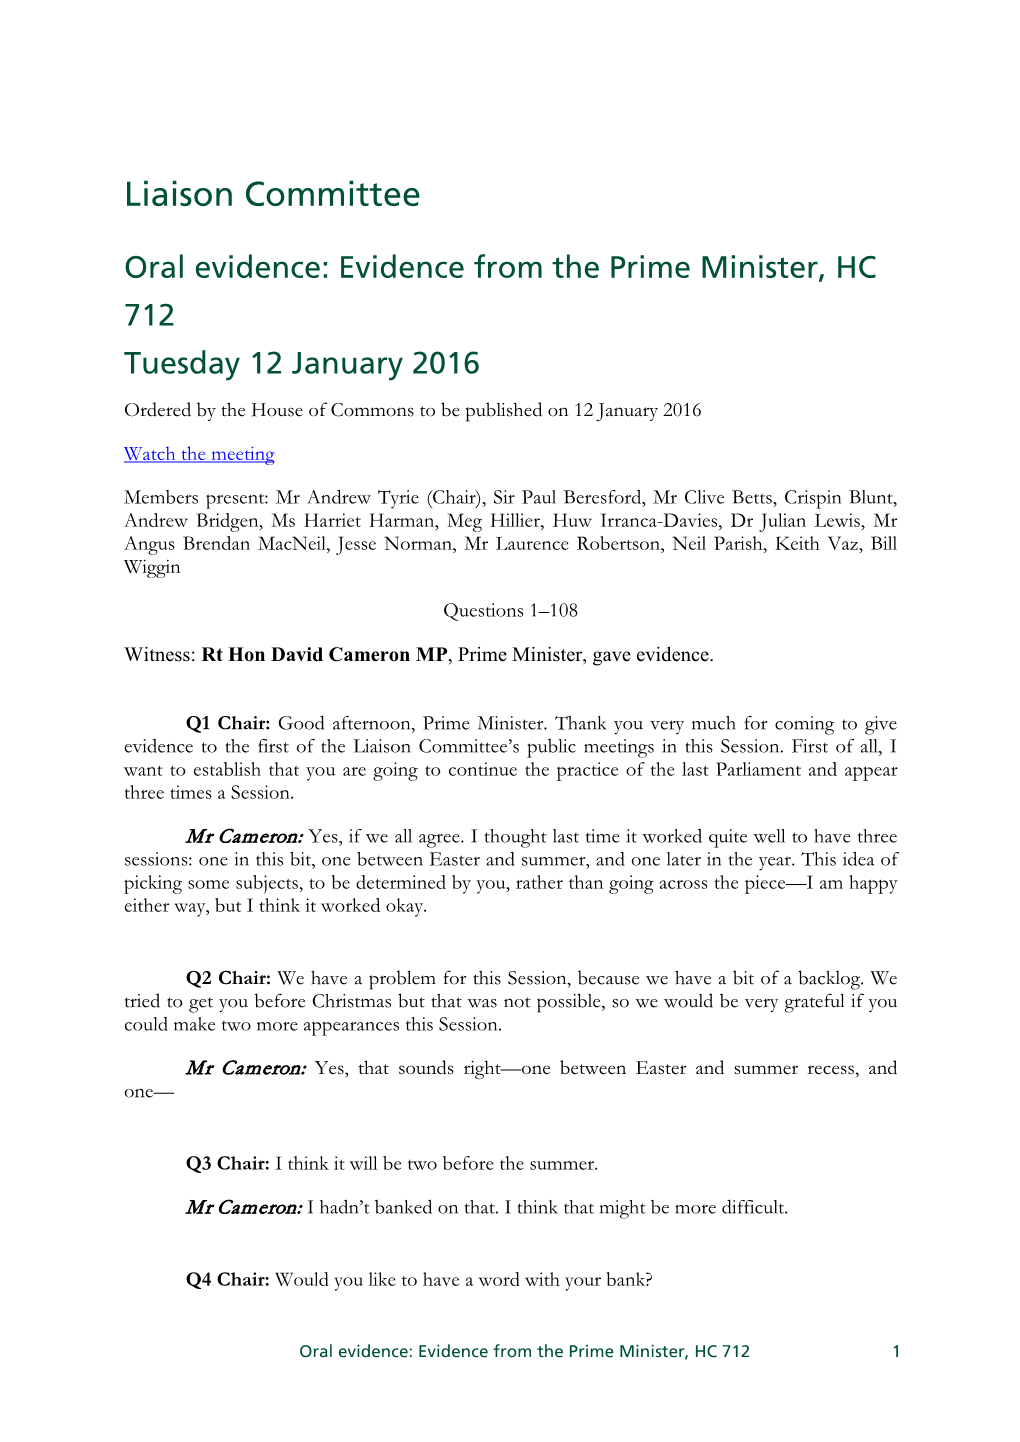 Oral Evidence: Evidence from the Prime Minister, HC 712 Tuesday 12 January 2016